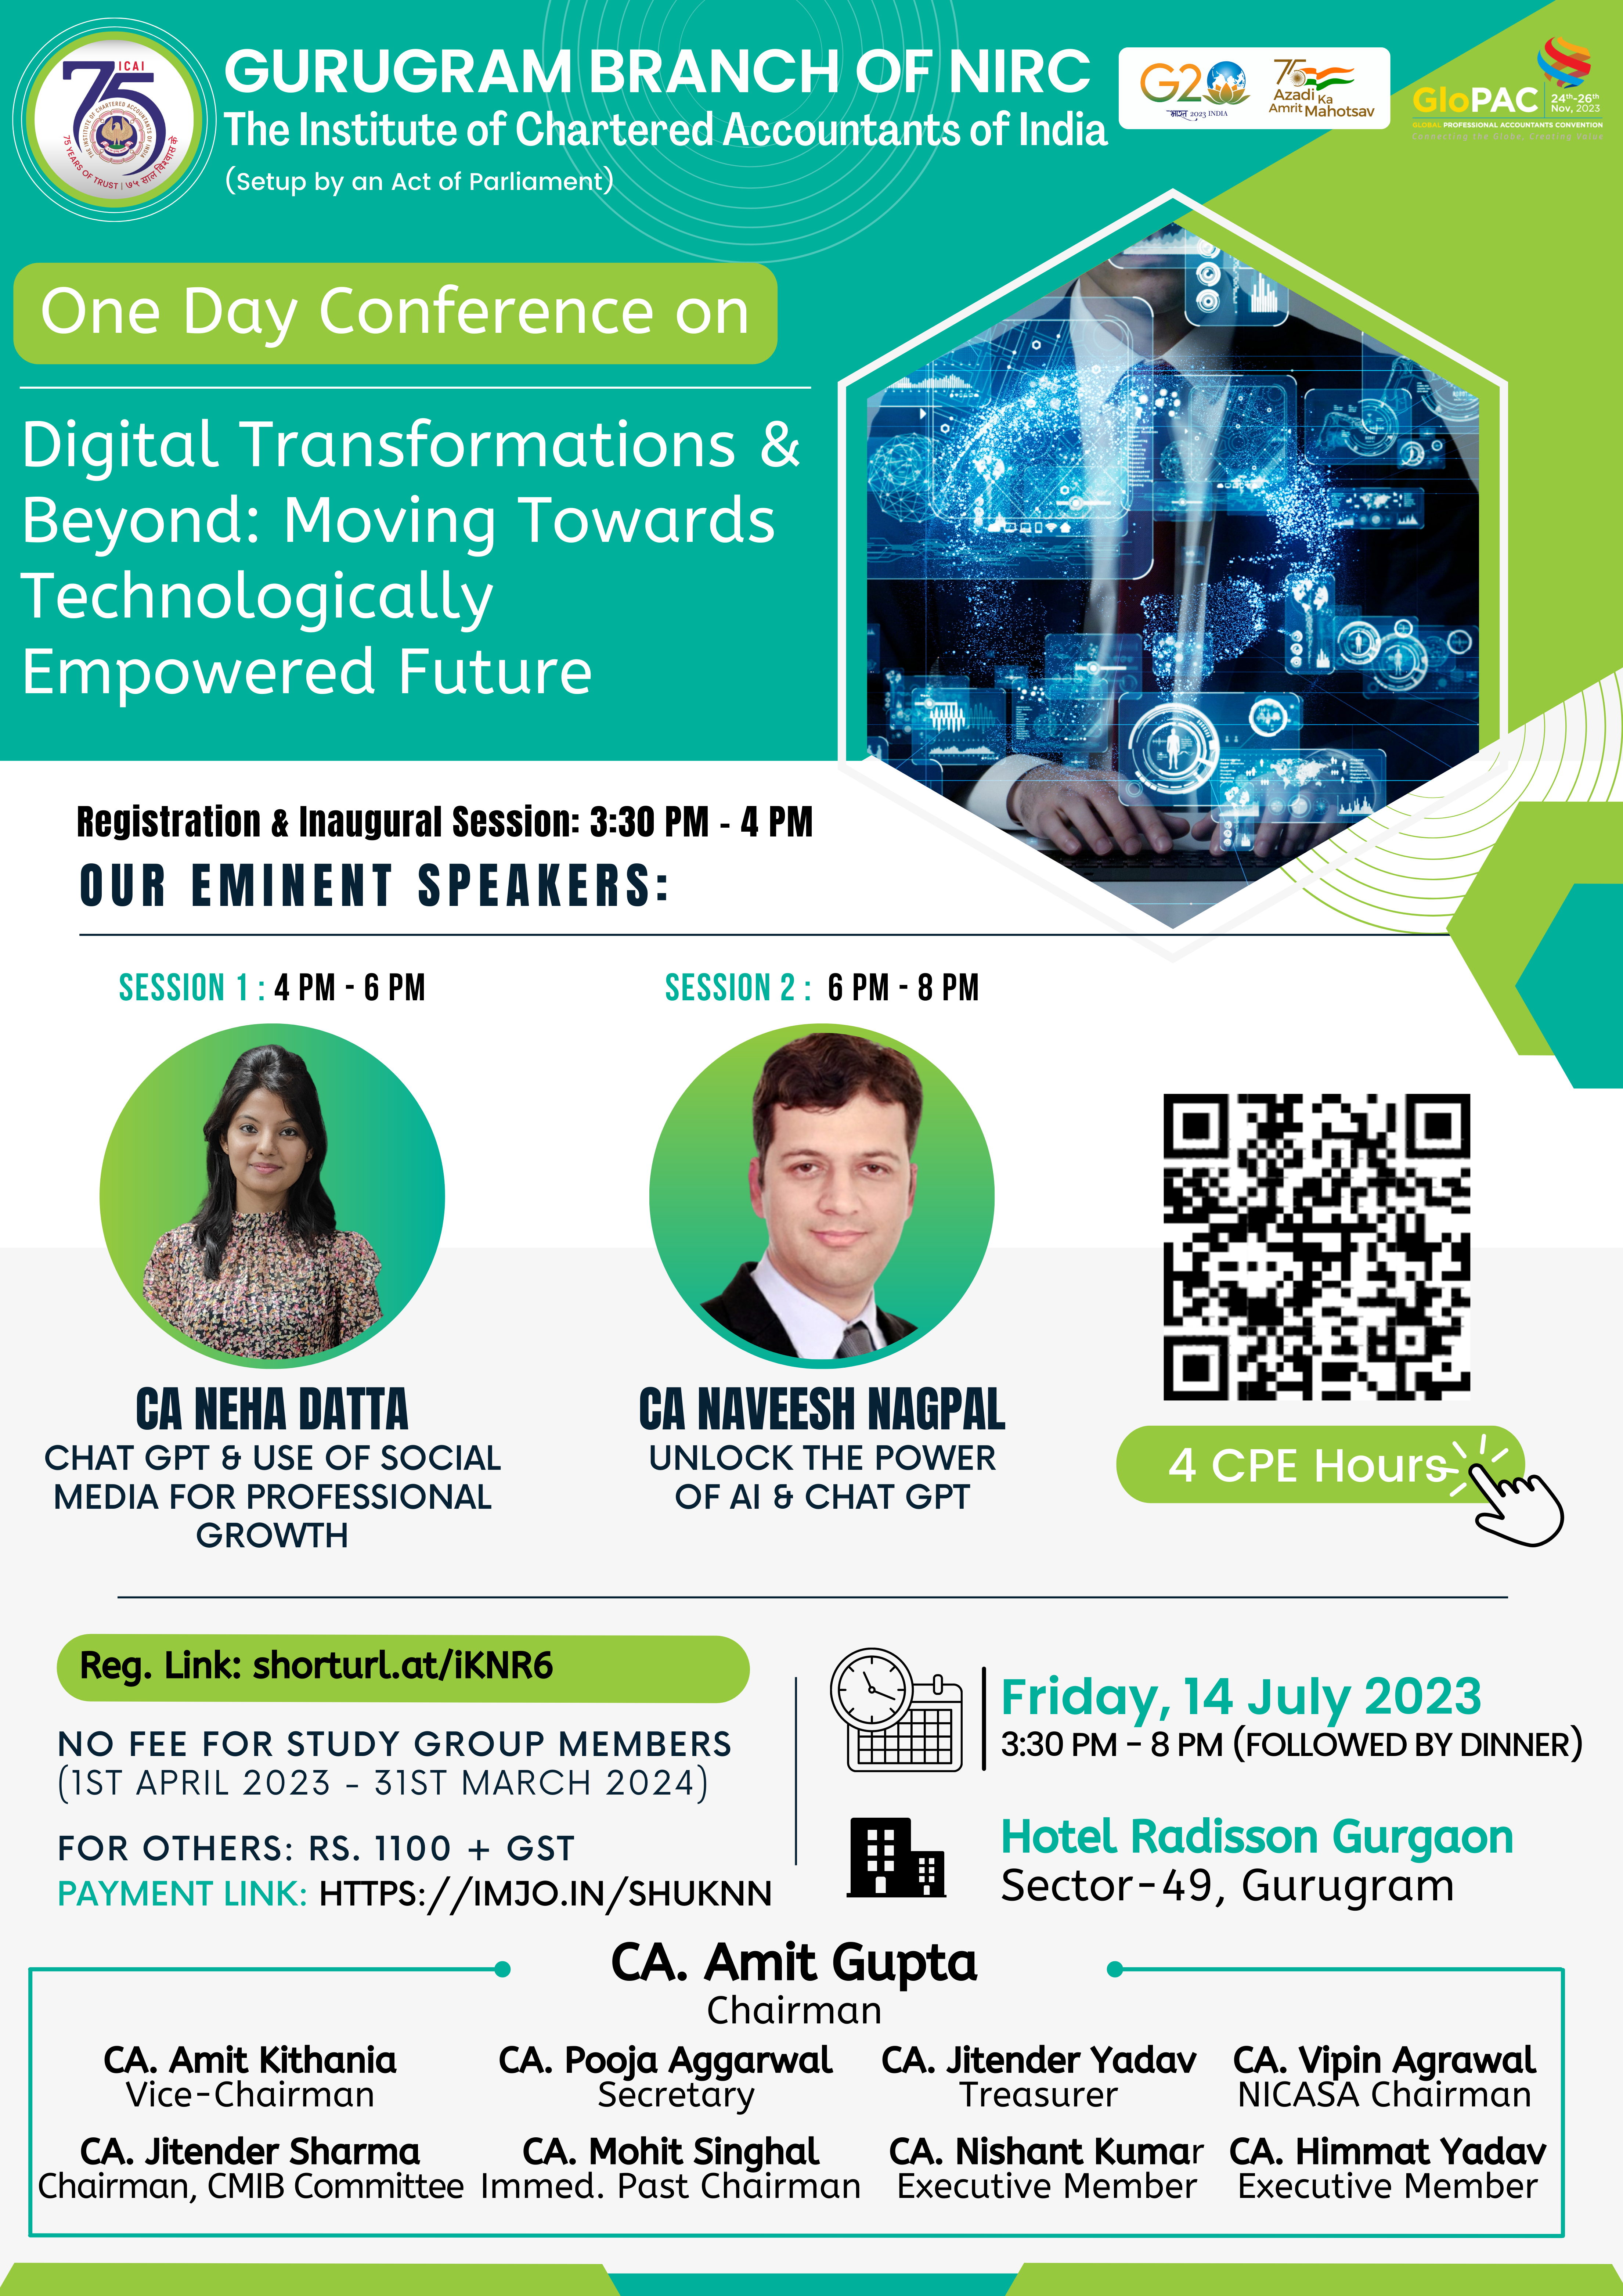 One Day Conference on Digital Transformations & Beyond: Moving Towards Technologically Empowered Future